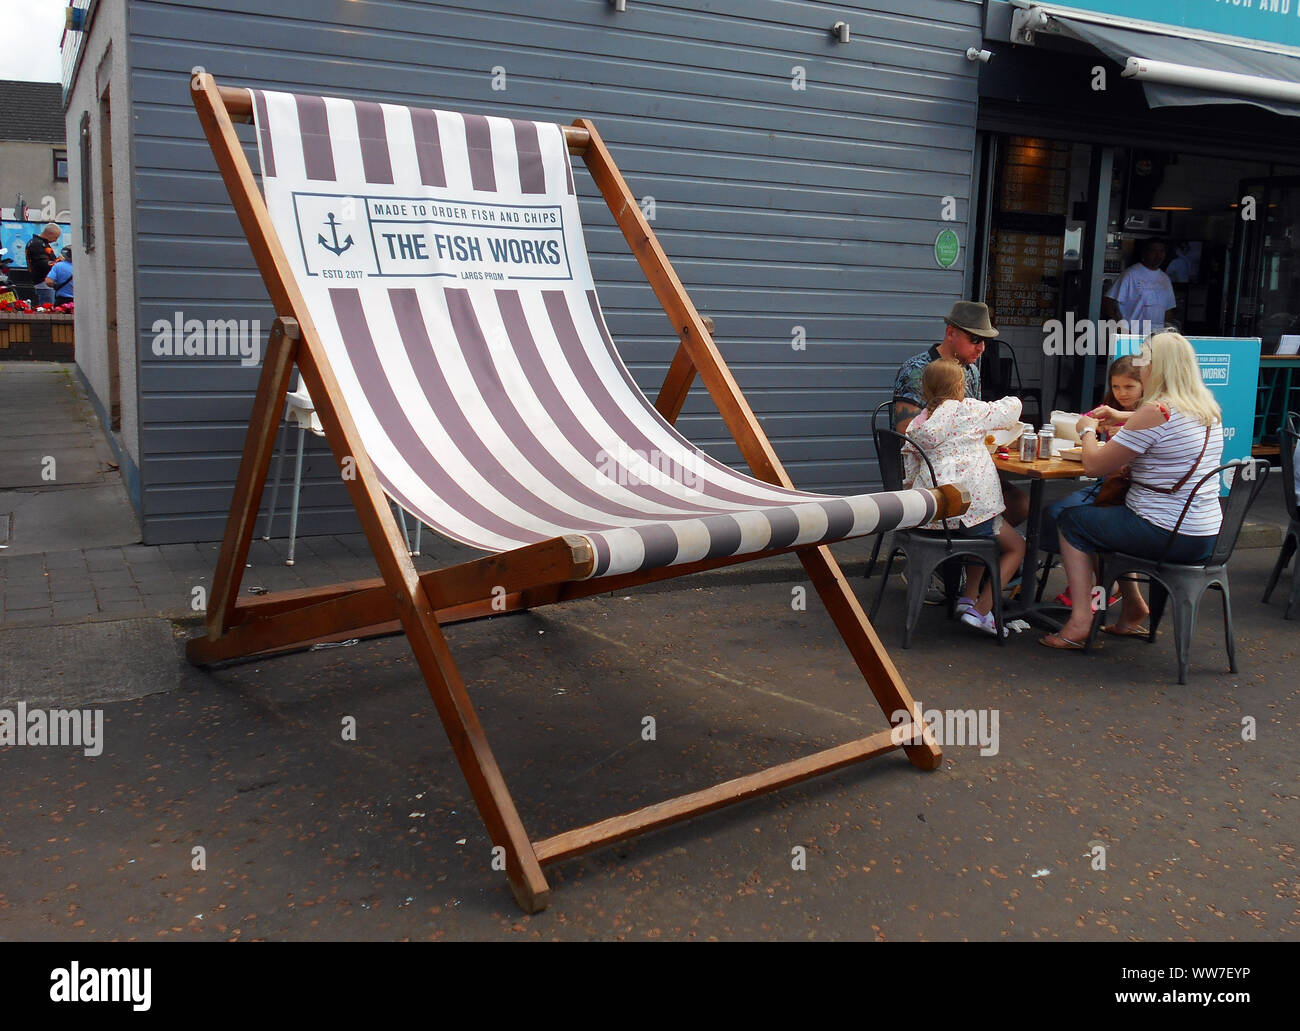 An extra large sized deck chair sits alongside the fish and chip shop that it is advertising, on the seafront of the sea side town of Largs in the Firth of Clyde, Scotland. Customers are seen to be tucking in, nearby this huge chair! Alan Wylie/ALAMY © Stock Photo